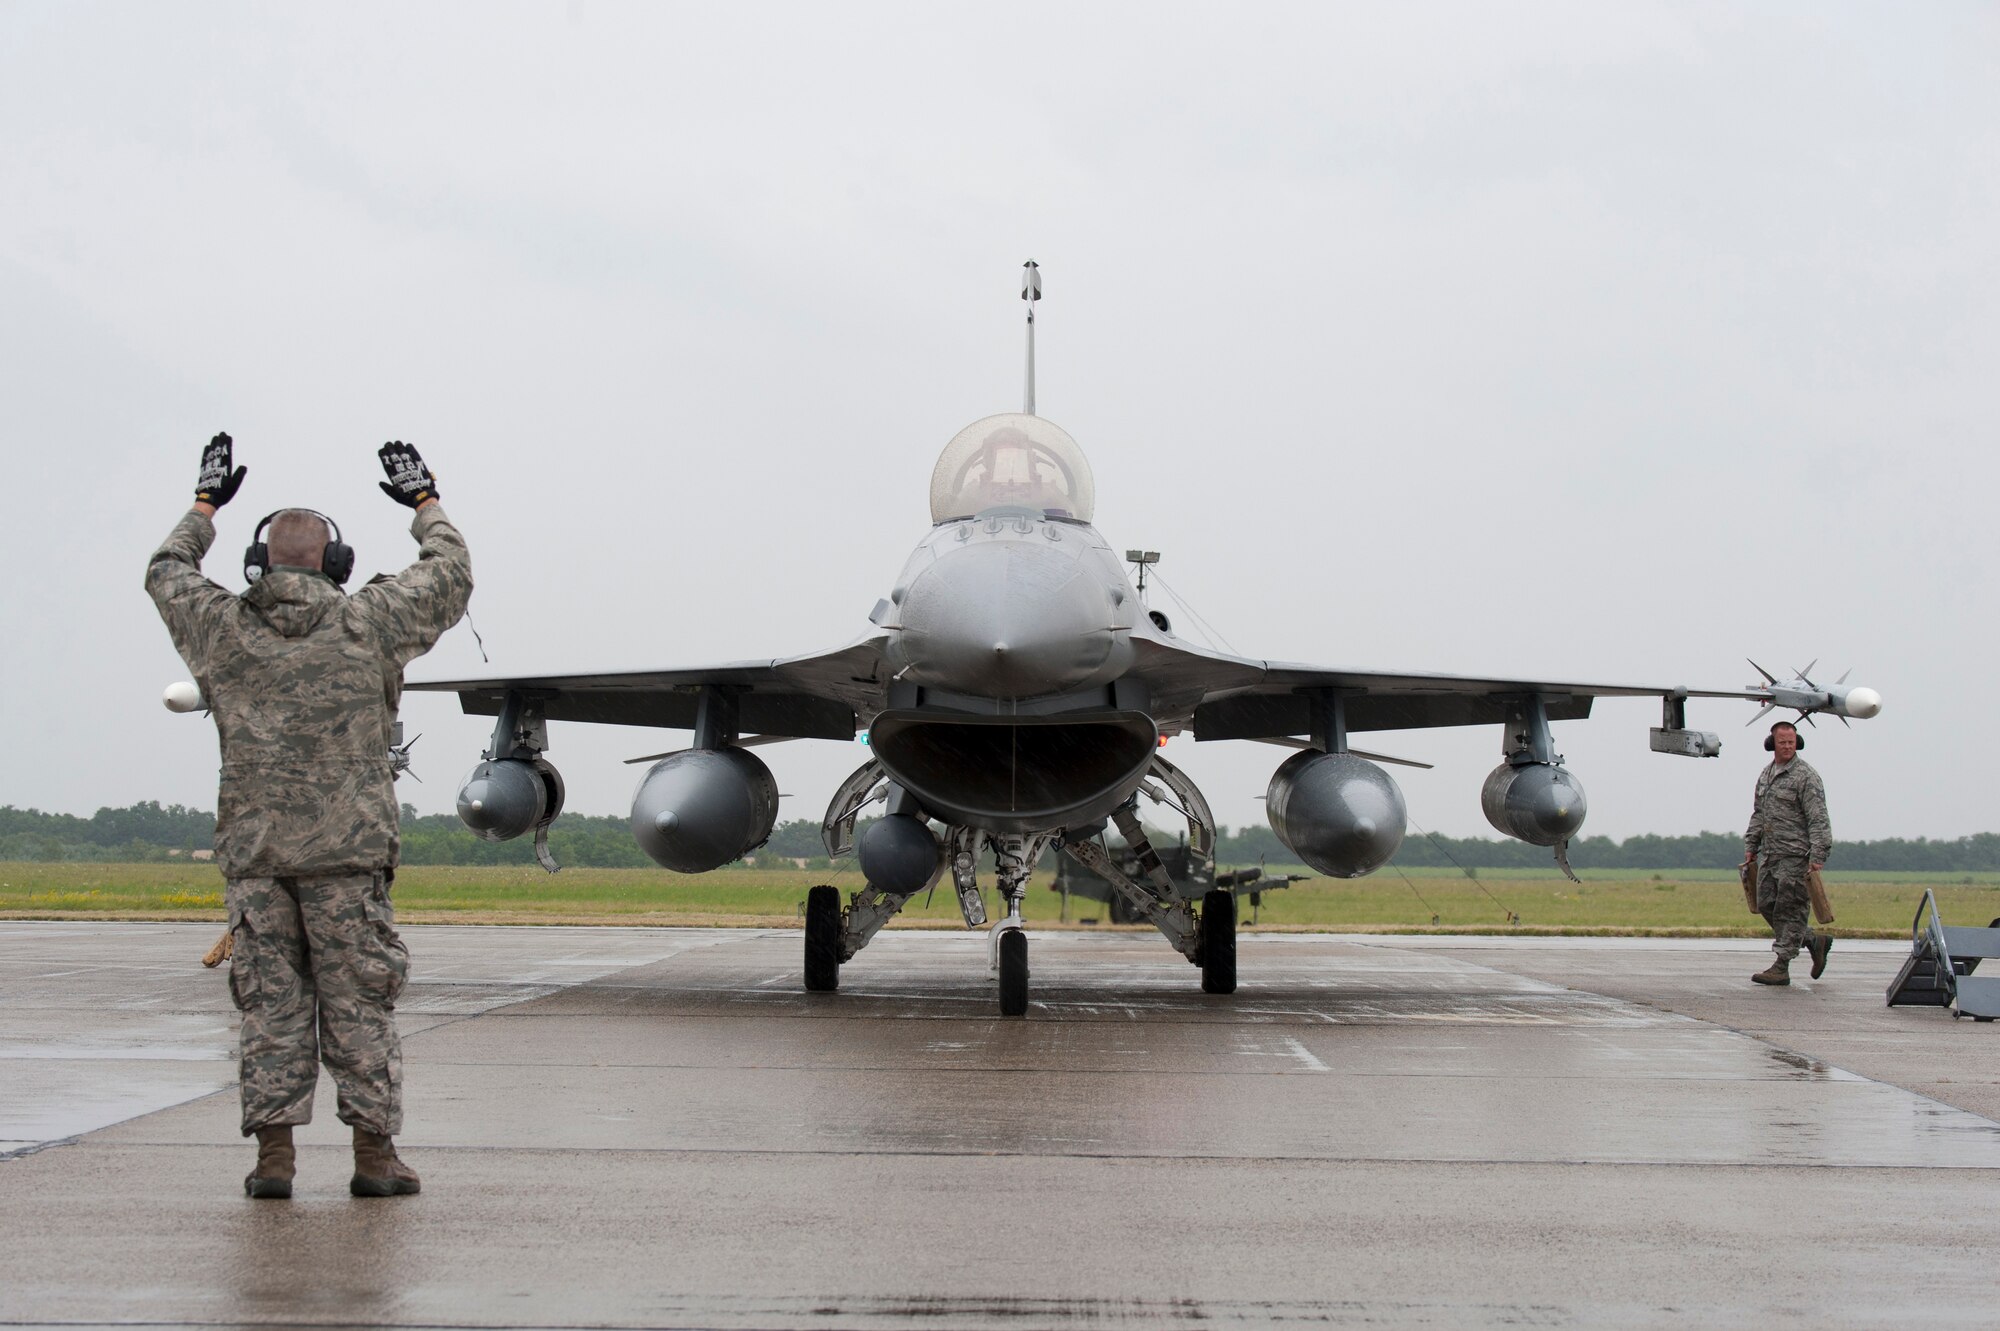 Master Sgt. John A. St. George, crew chief from the 140th Wing, Colorado Air National Guard, Buckley Air Force Base, Colorado, marshals an F-16 Fighting Falcon into position after landing at Papa Air Base, Hungary, while other crew chiefs chalk the wheels. This is the first time Colorado jets have landed in Hungary, and the first time the Colorado Air Guard has been to Europe in at more than 20 years. In support of Operation Atlantic Resolve, the 140th Wing, Colorado Air National Guard from Buckley Air Force Base, Colorado, has deployed approximately 200 Airmen to Papa Air Base, Hungary, to conduct familiarization training alongside our NATO ally, Hungary. They will also participate in cross-border training with other deployed U.S. forces' aircraft and NATO aircraft in the region. This deployment continues to demonstrate our commitment to our allies and European security and stability. (U.S. Air National Guard photo by Senior Master Sgt. John Rohrer) 